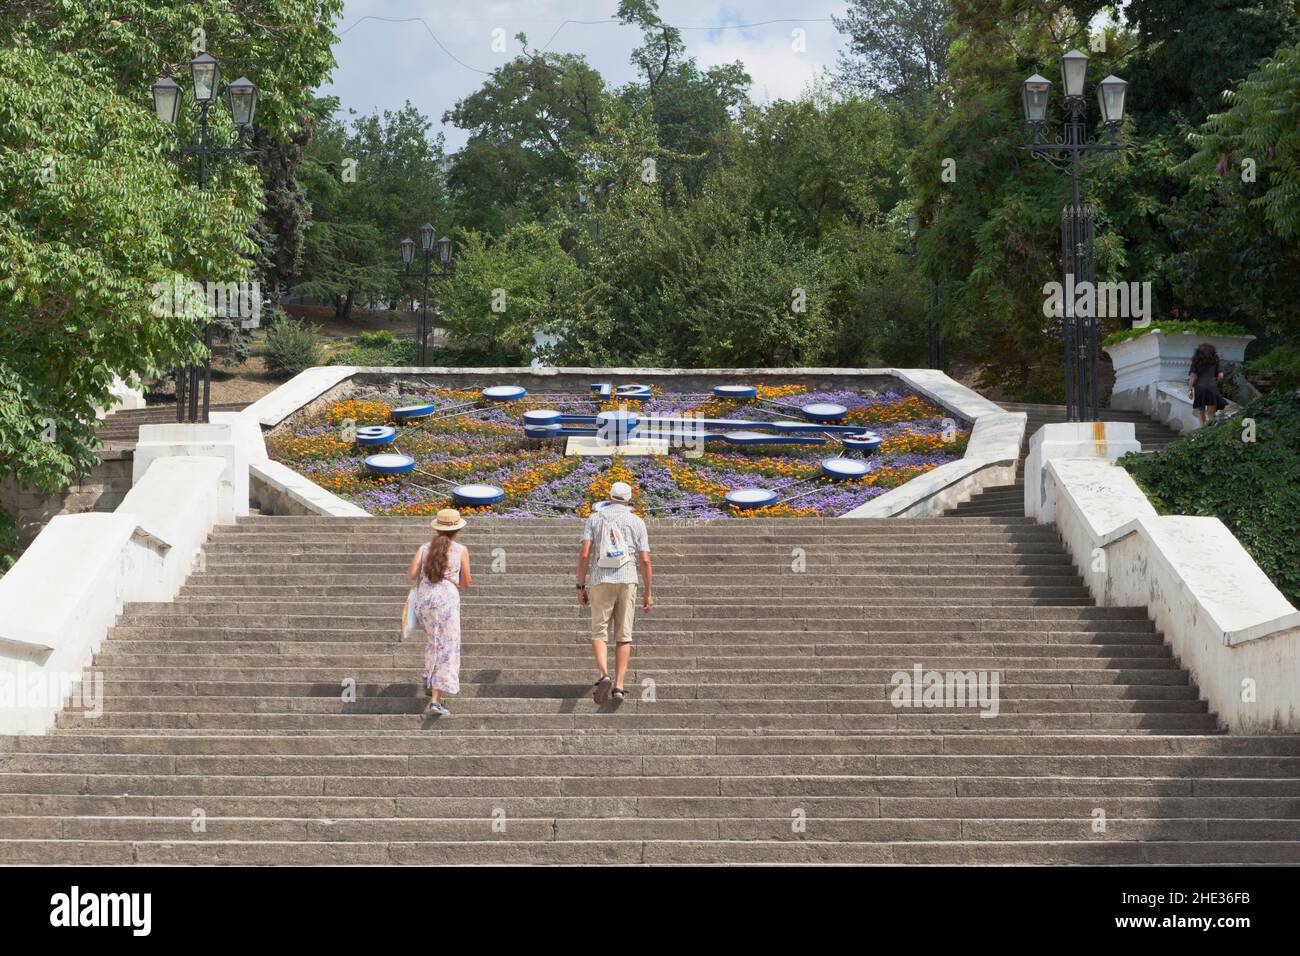 Sevastopol, Crimea, Russia - July 29, 2020: Sinop Stairs leading to the top of the Central City Hill in the city of Sevastopol, Crimea Stock Photo